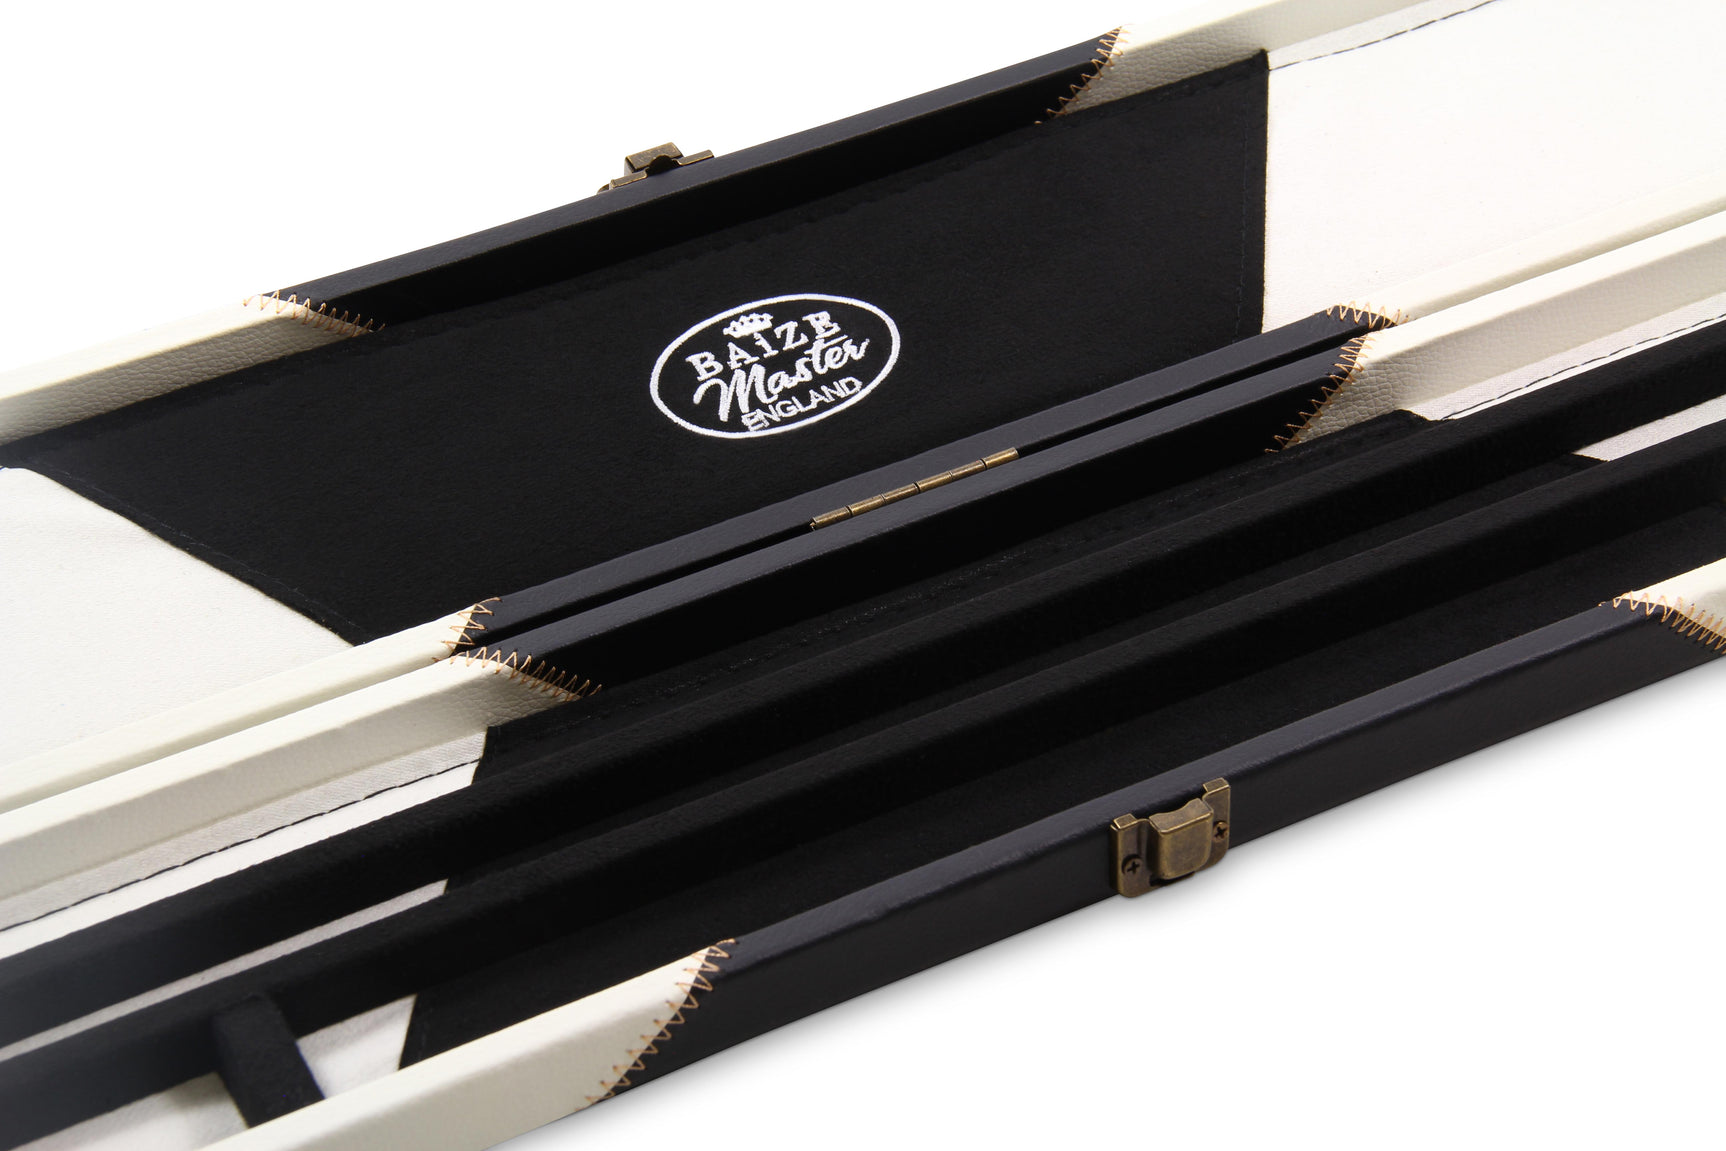 Baize Master 2 Piece 3 SLOT ARROW Snooker Pool Cue Case with Plastic Ends